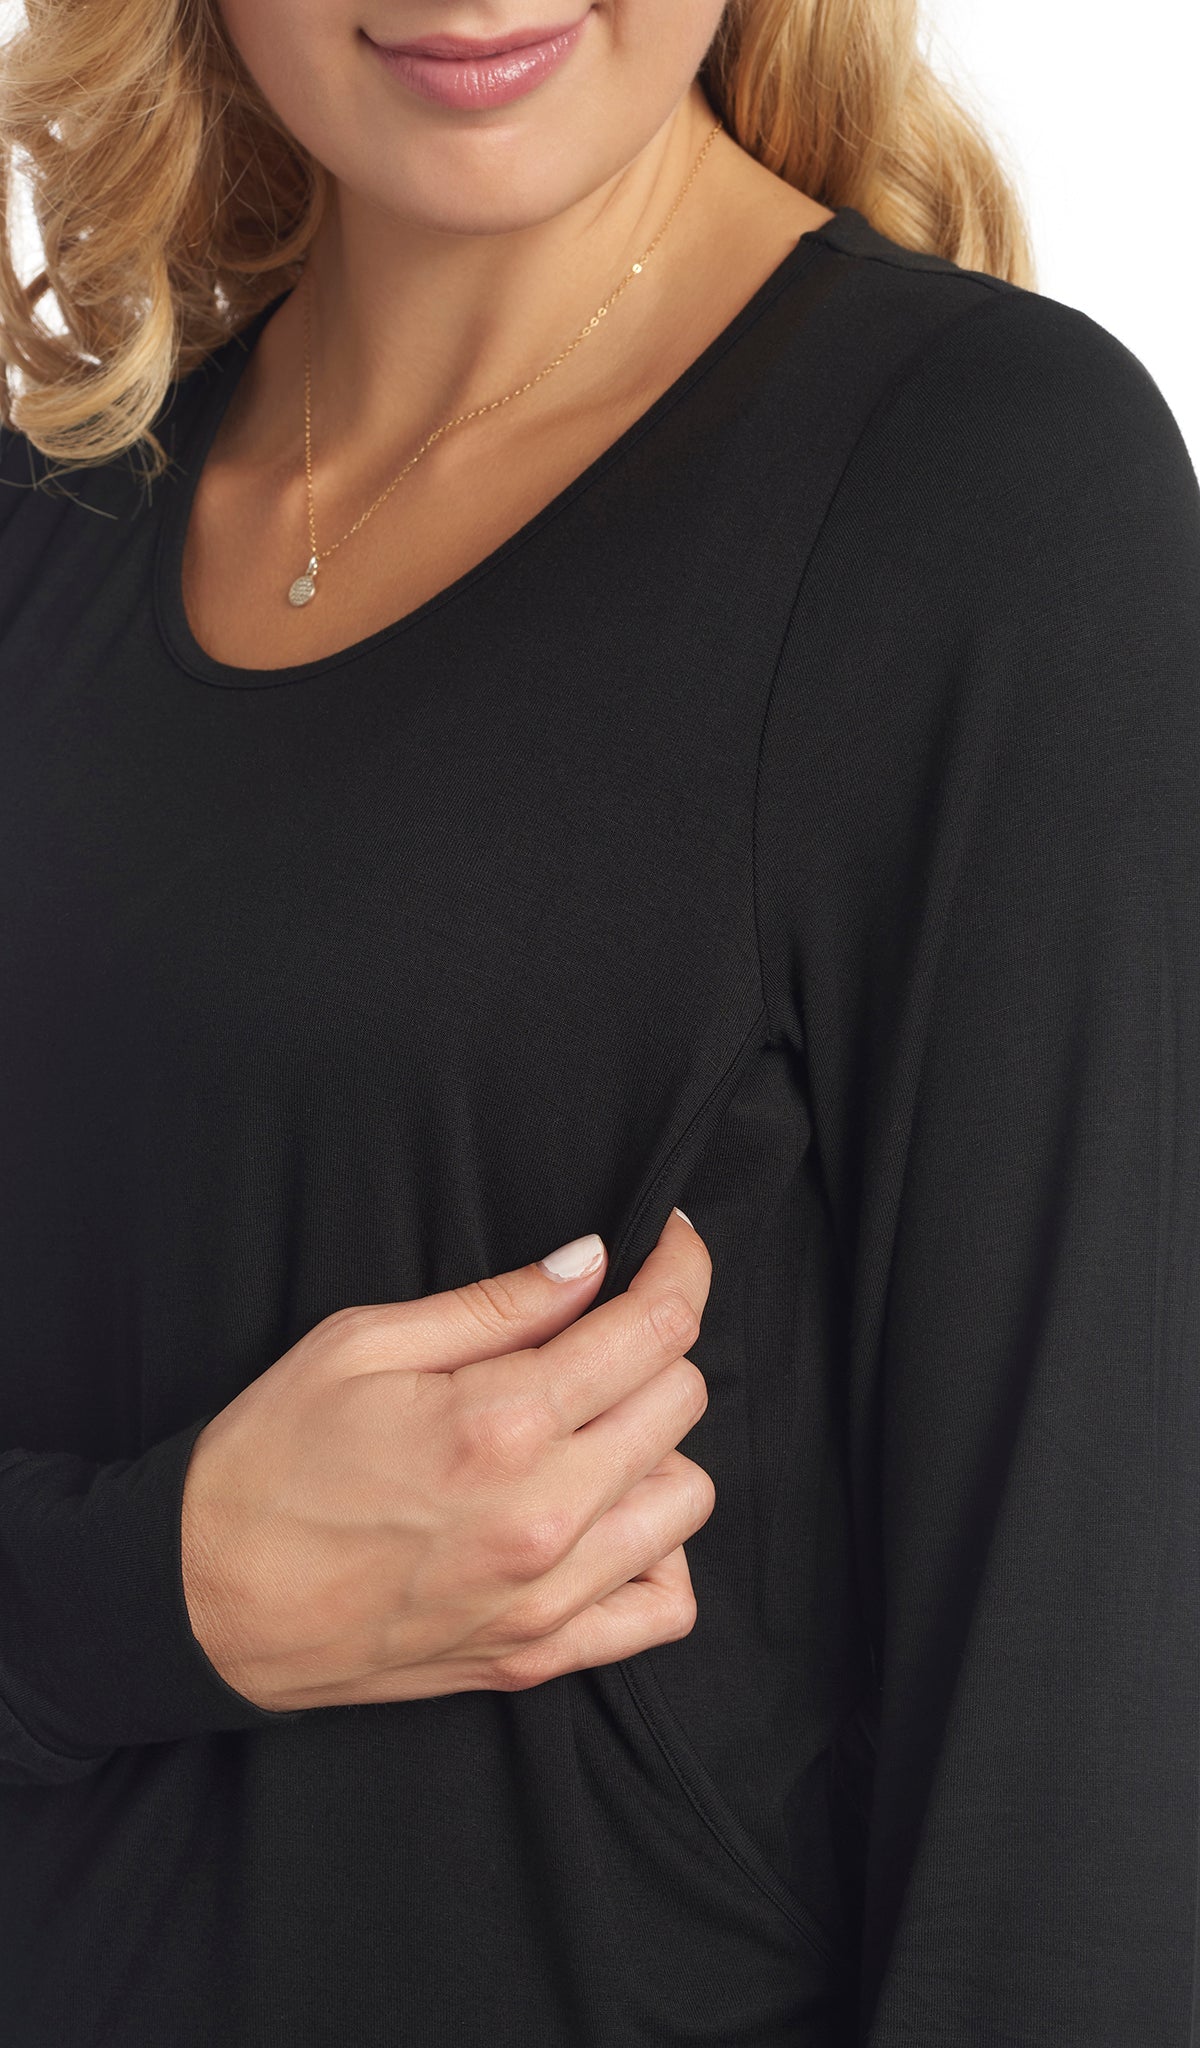 Black Whitney 2-Piece side view nursing access detail of long sleeve top.